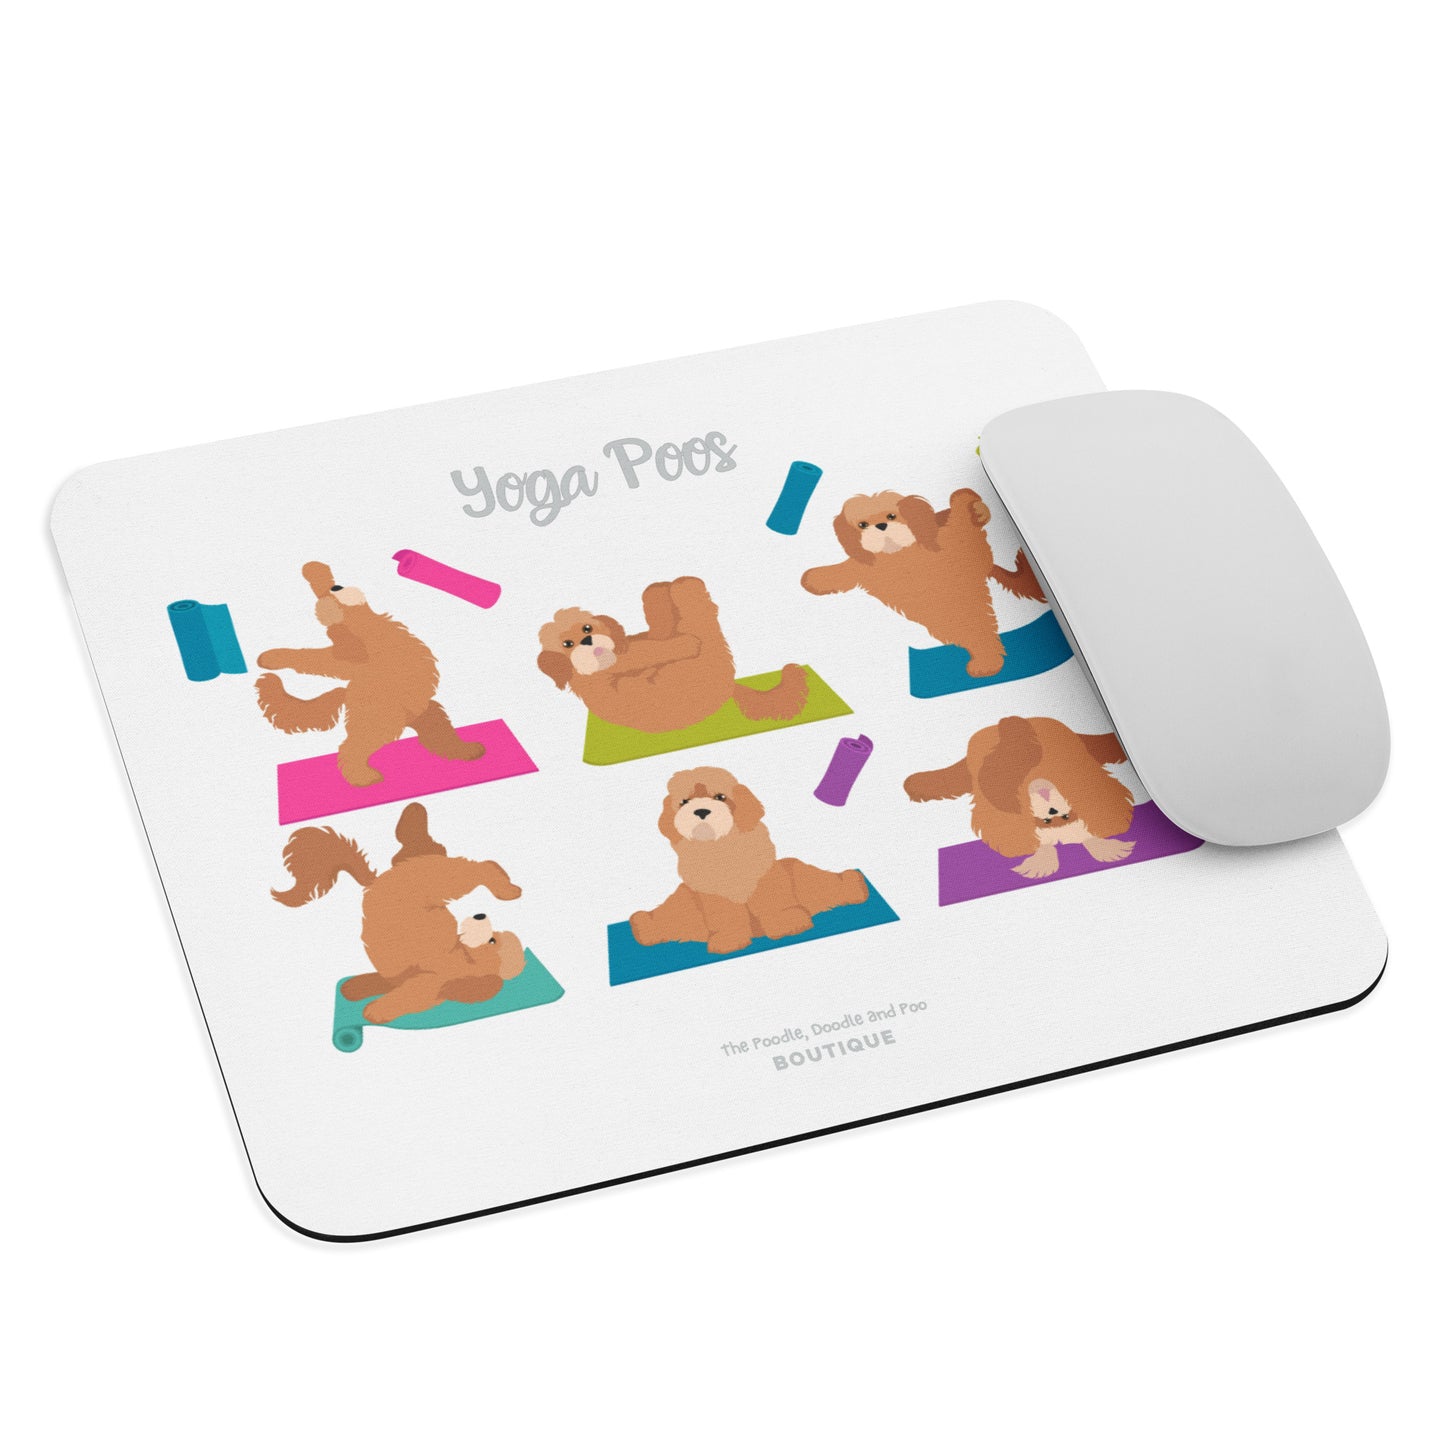 "Yoga Poos" Mouse pad